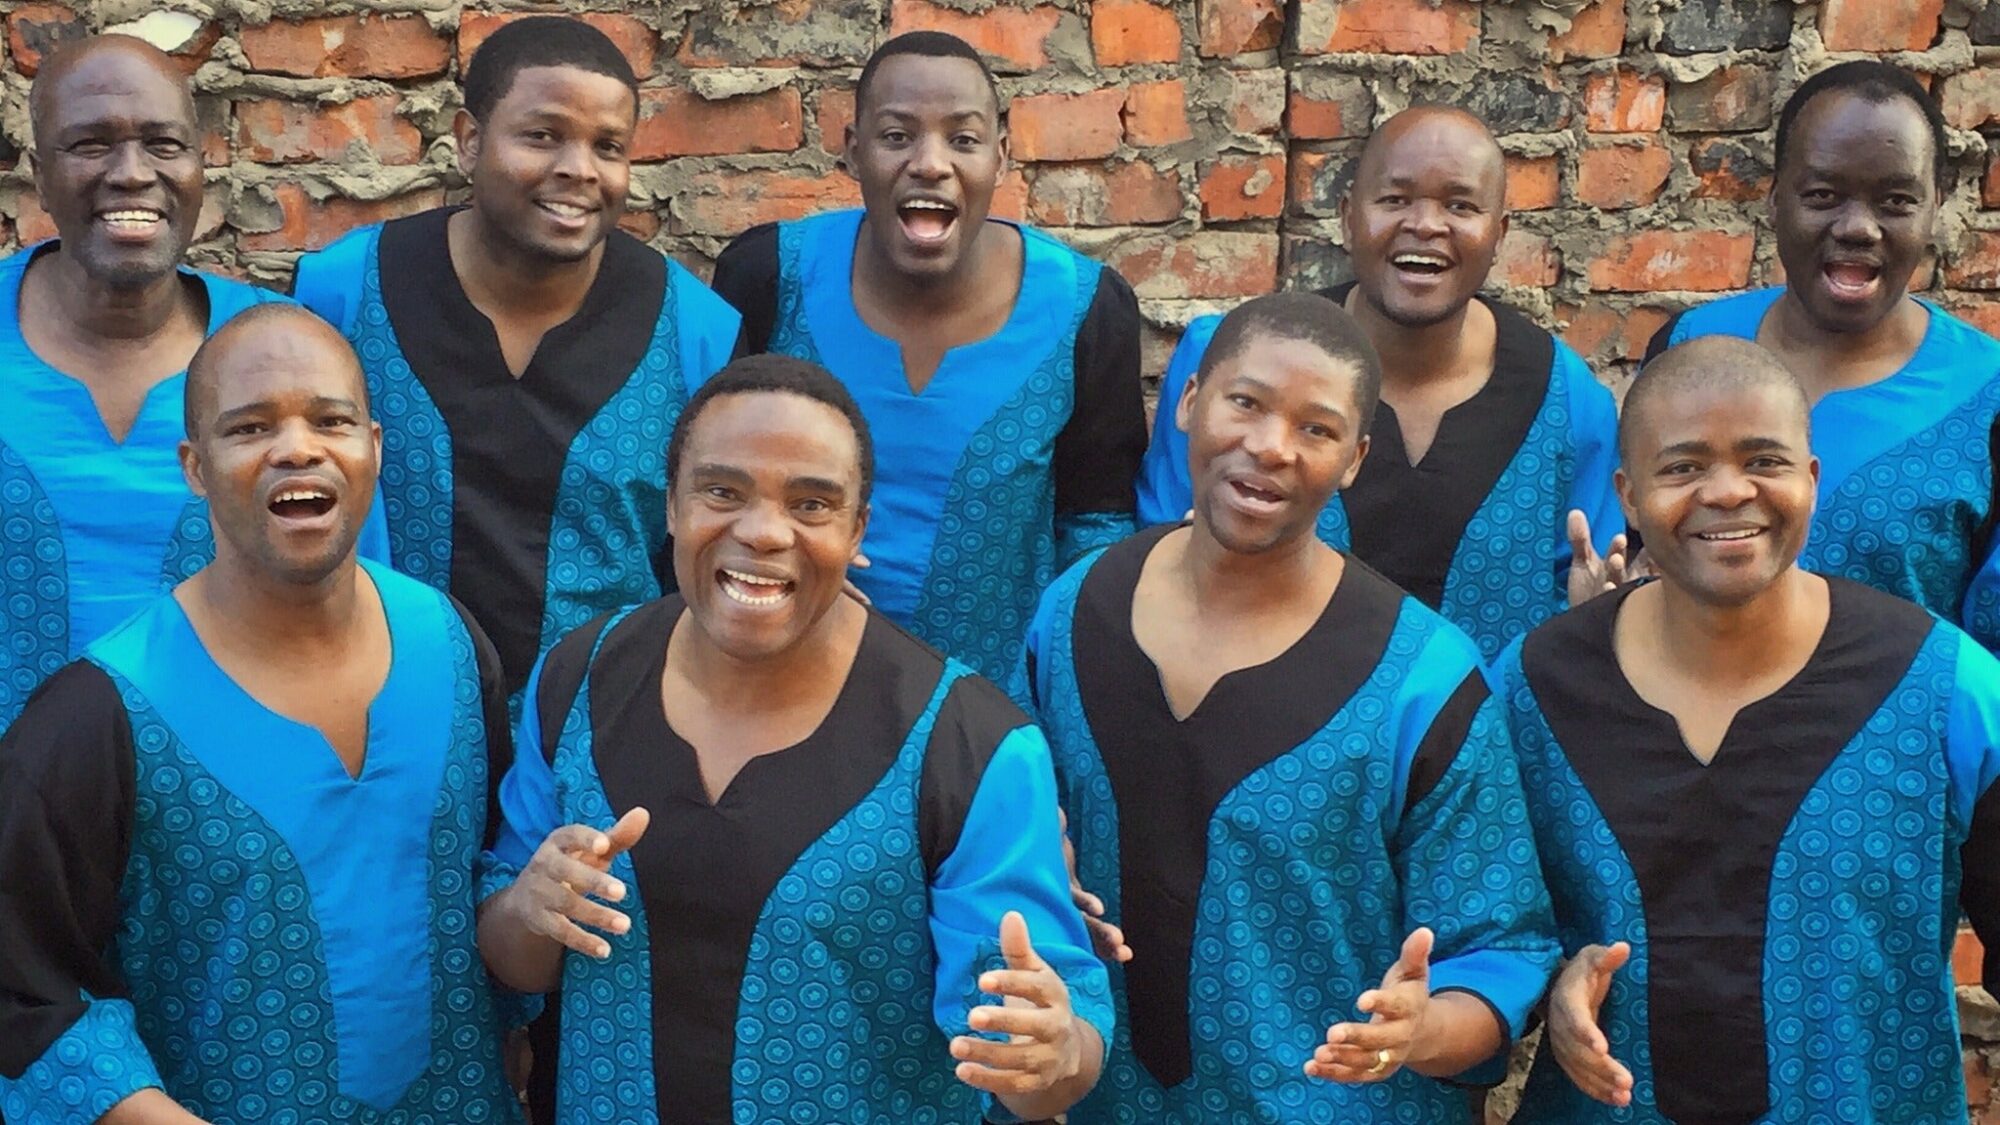 Image name Ladysmith Black Mambazo at Grand Opera House York York the 11 image from the post Ladysmith Black Mambazo at Grand Opera House, York, York in Yorkshire.com.